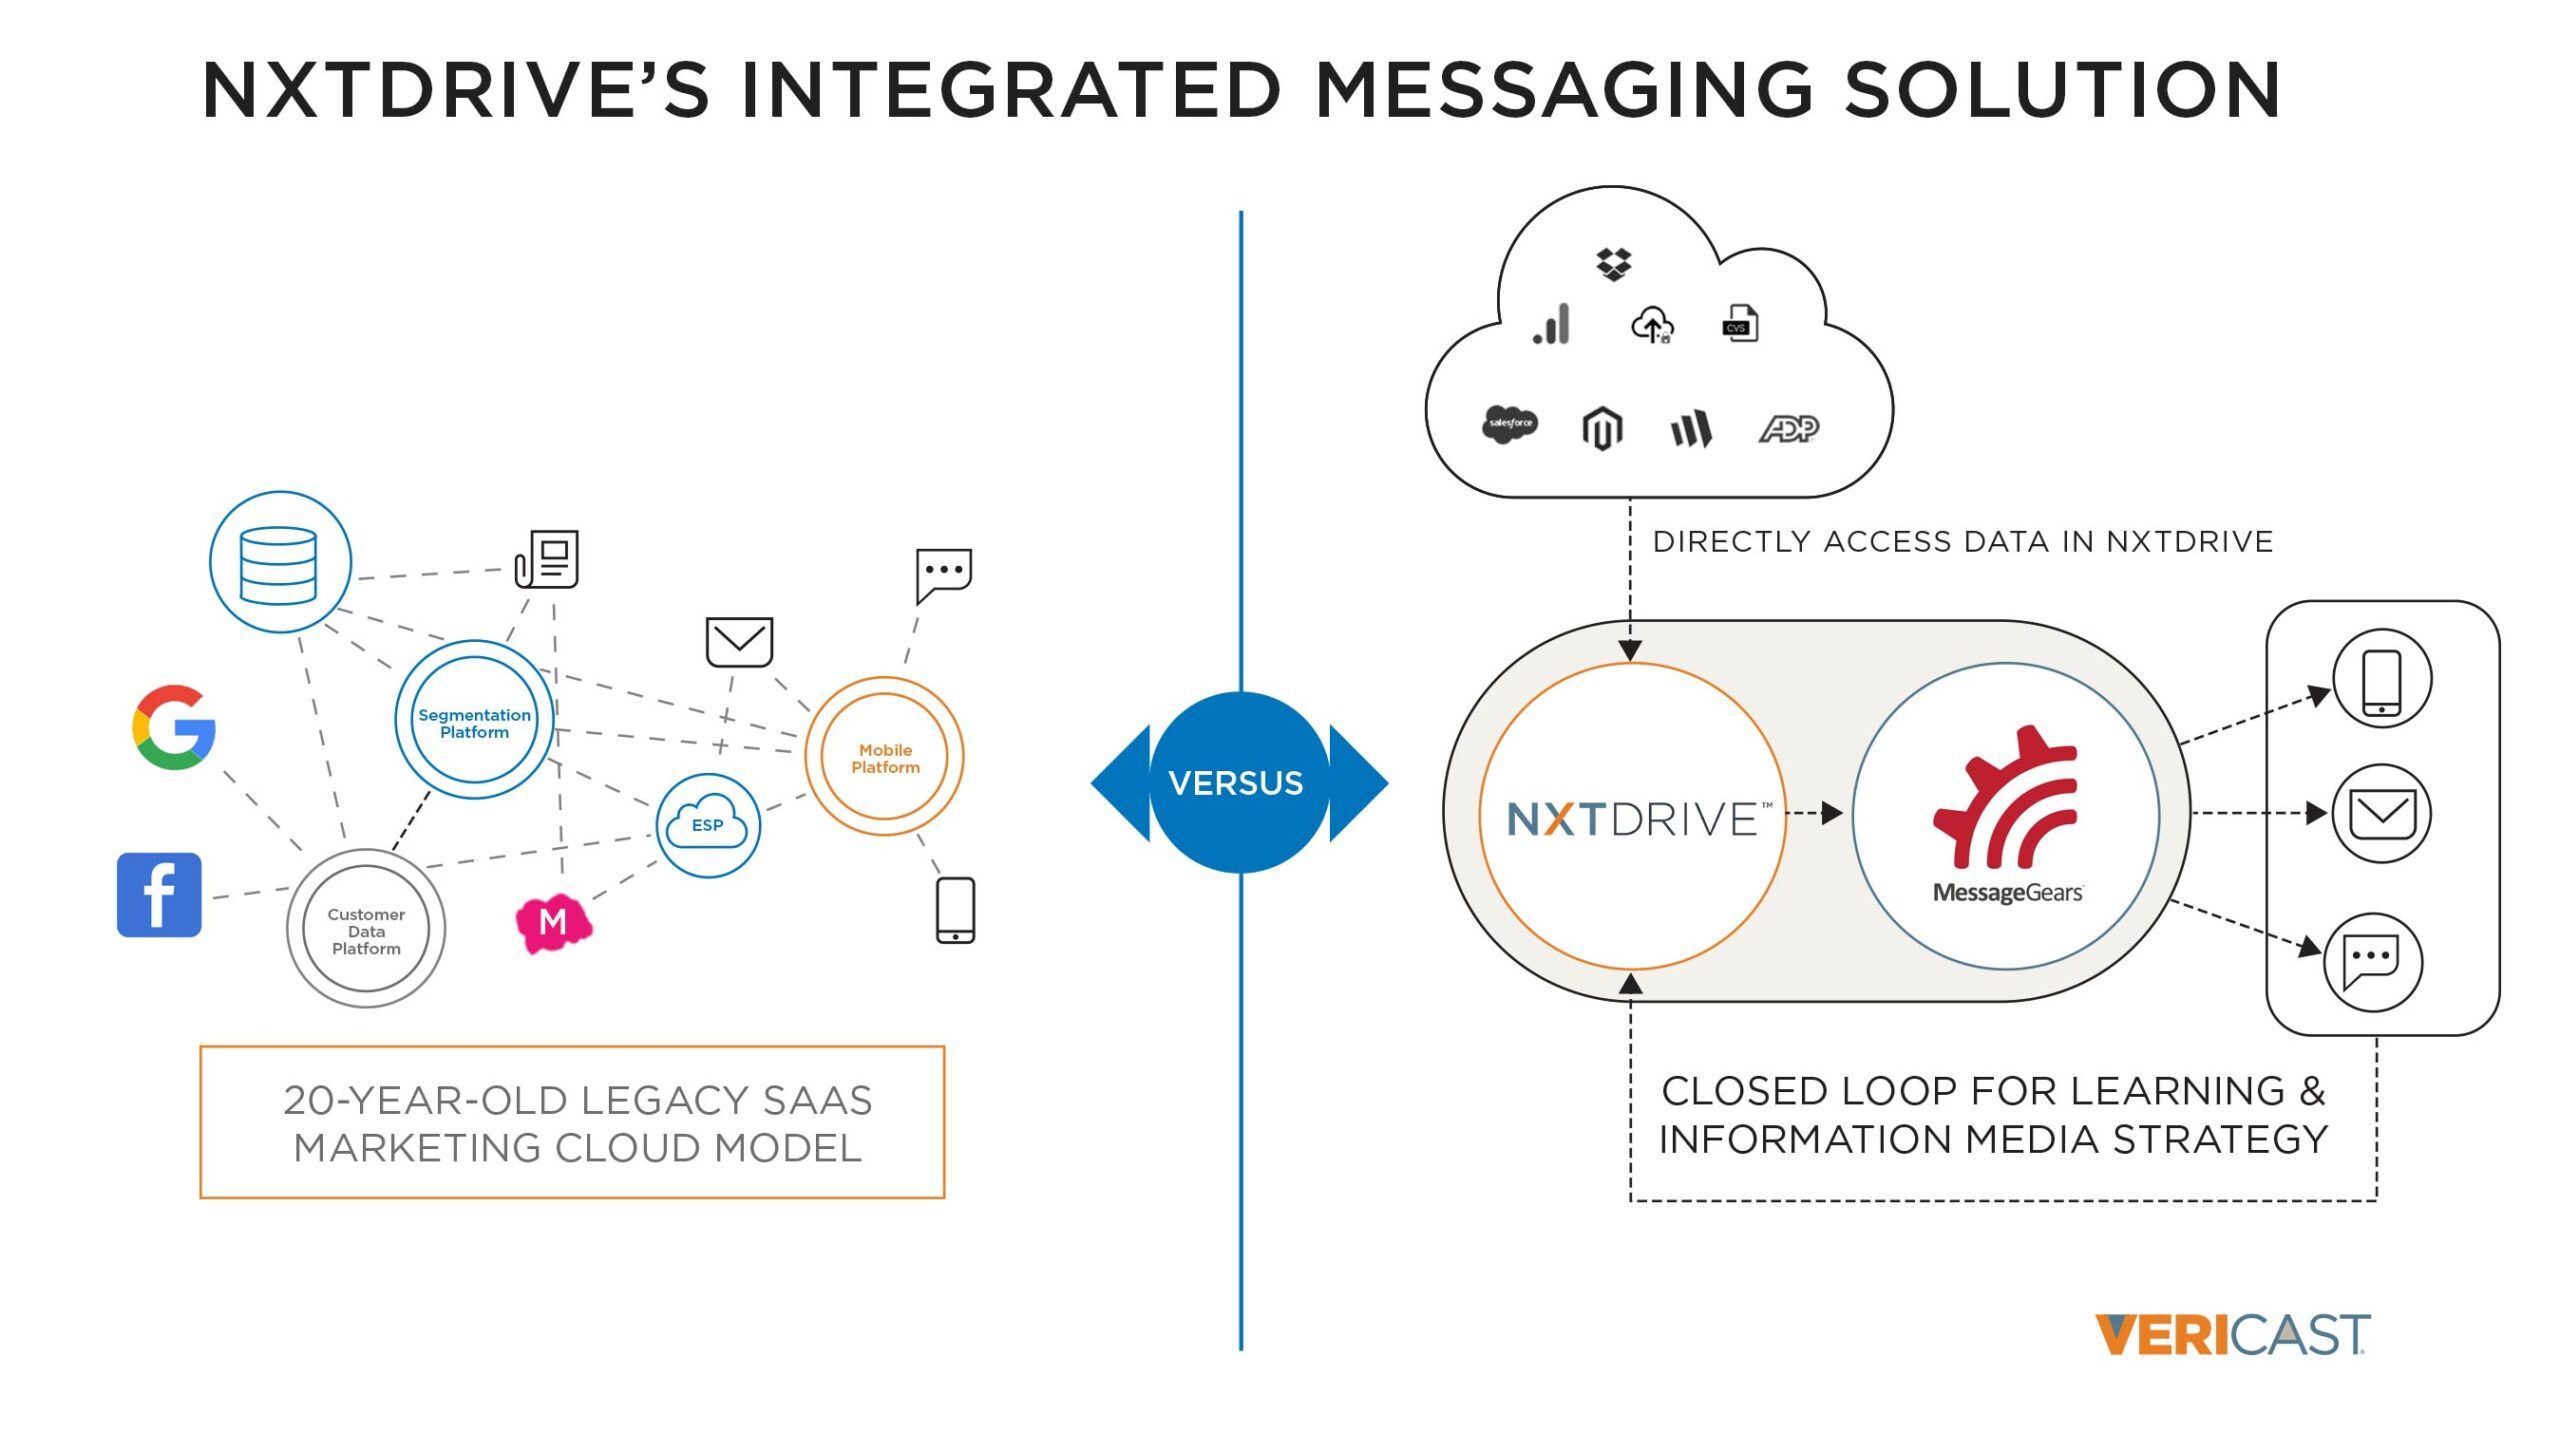 Vericast’s NXTDRIVE Delivers Next-Level Customer Engagement with Integrated, Personalized Messaging